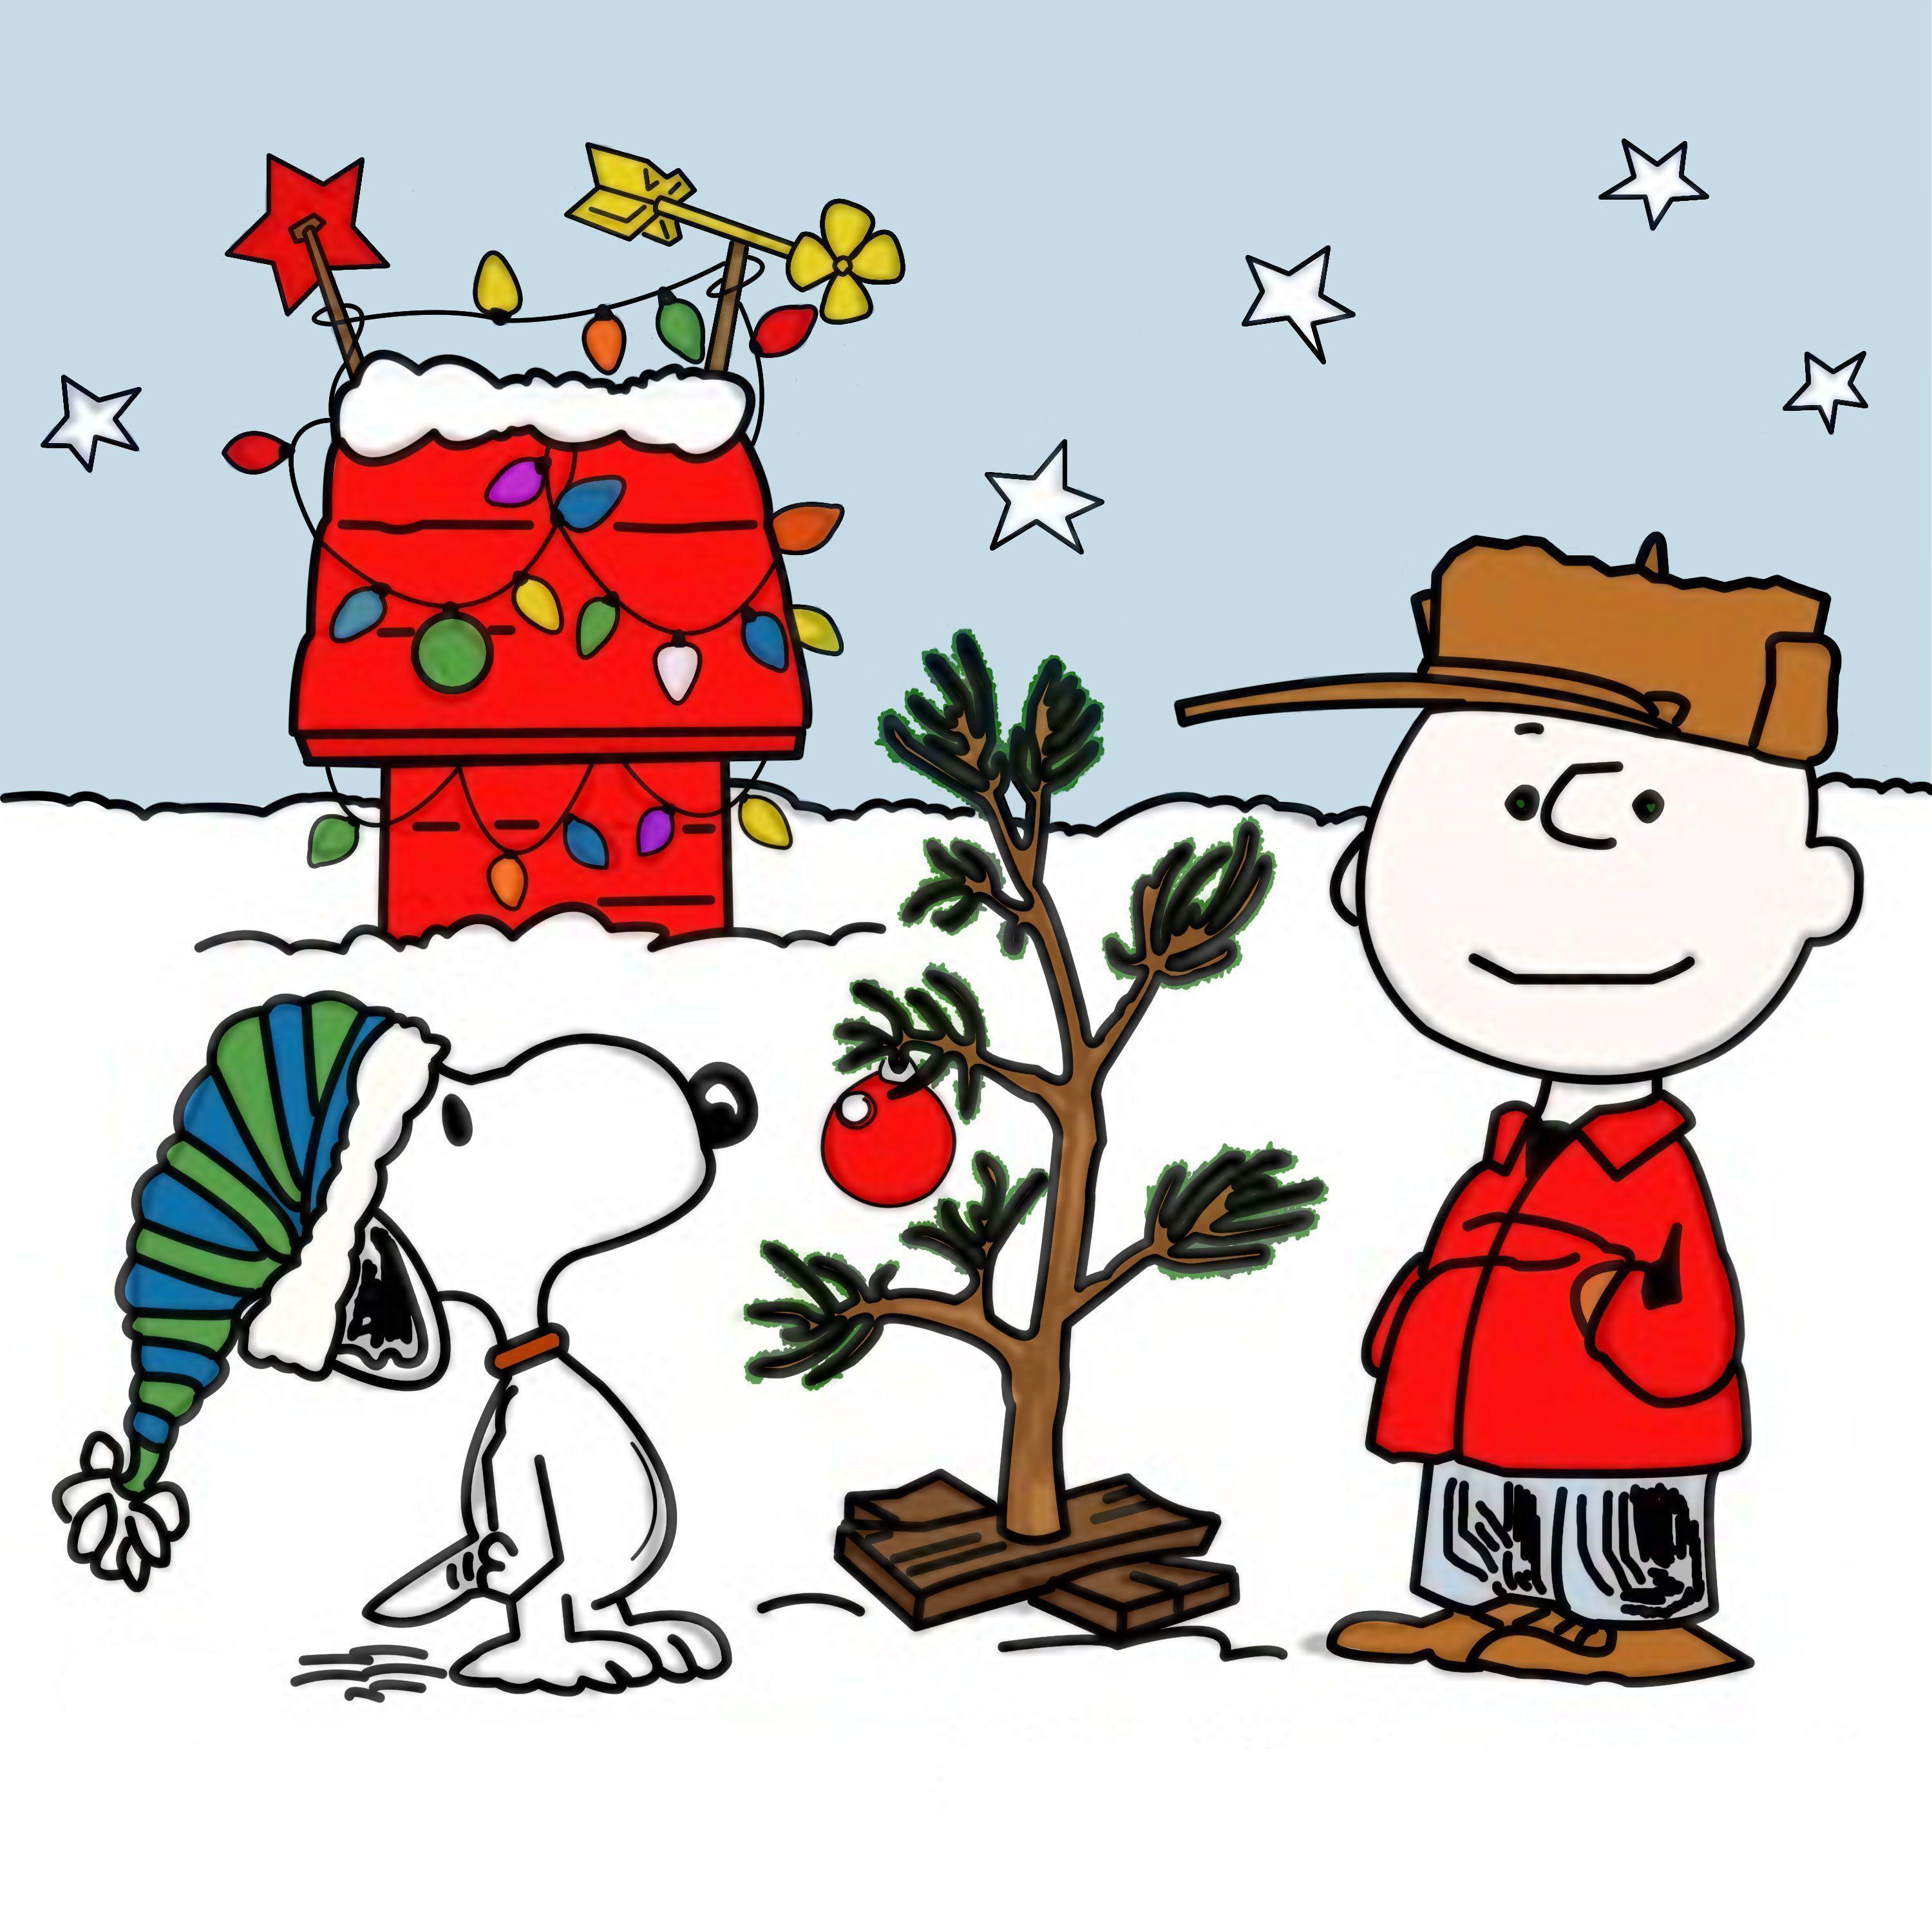 Snoopy Christmas Background